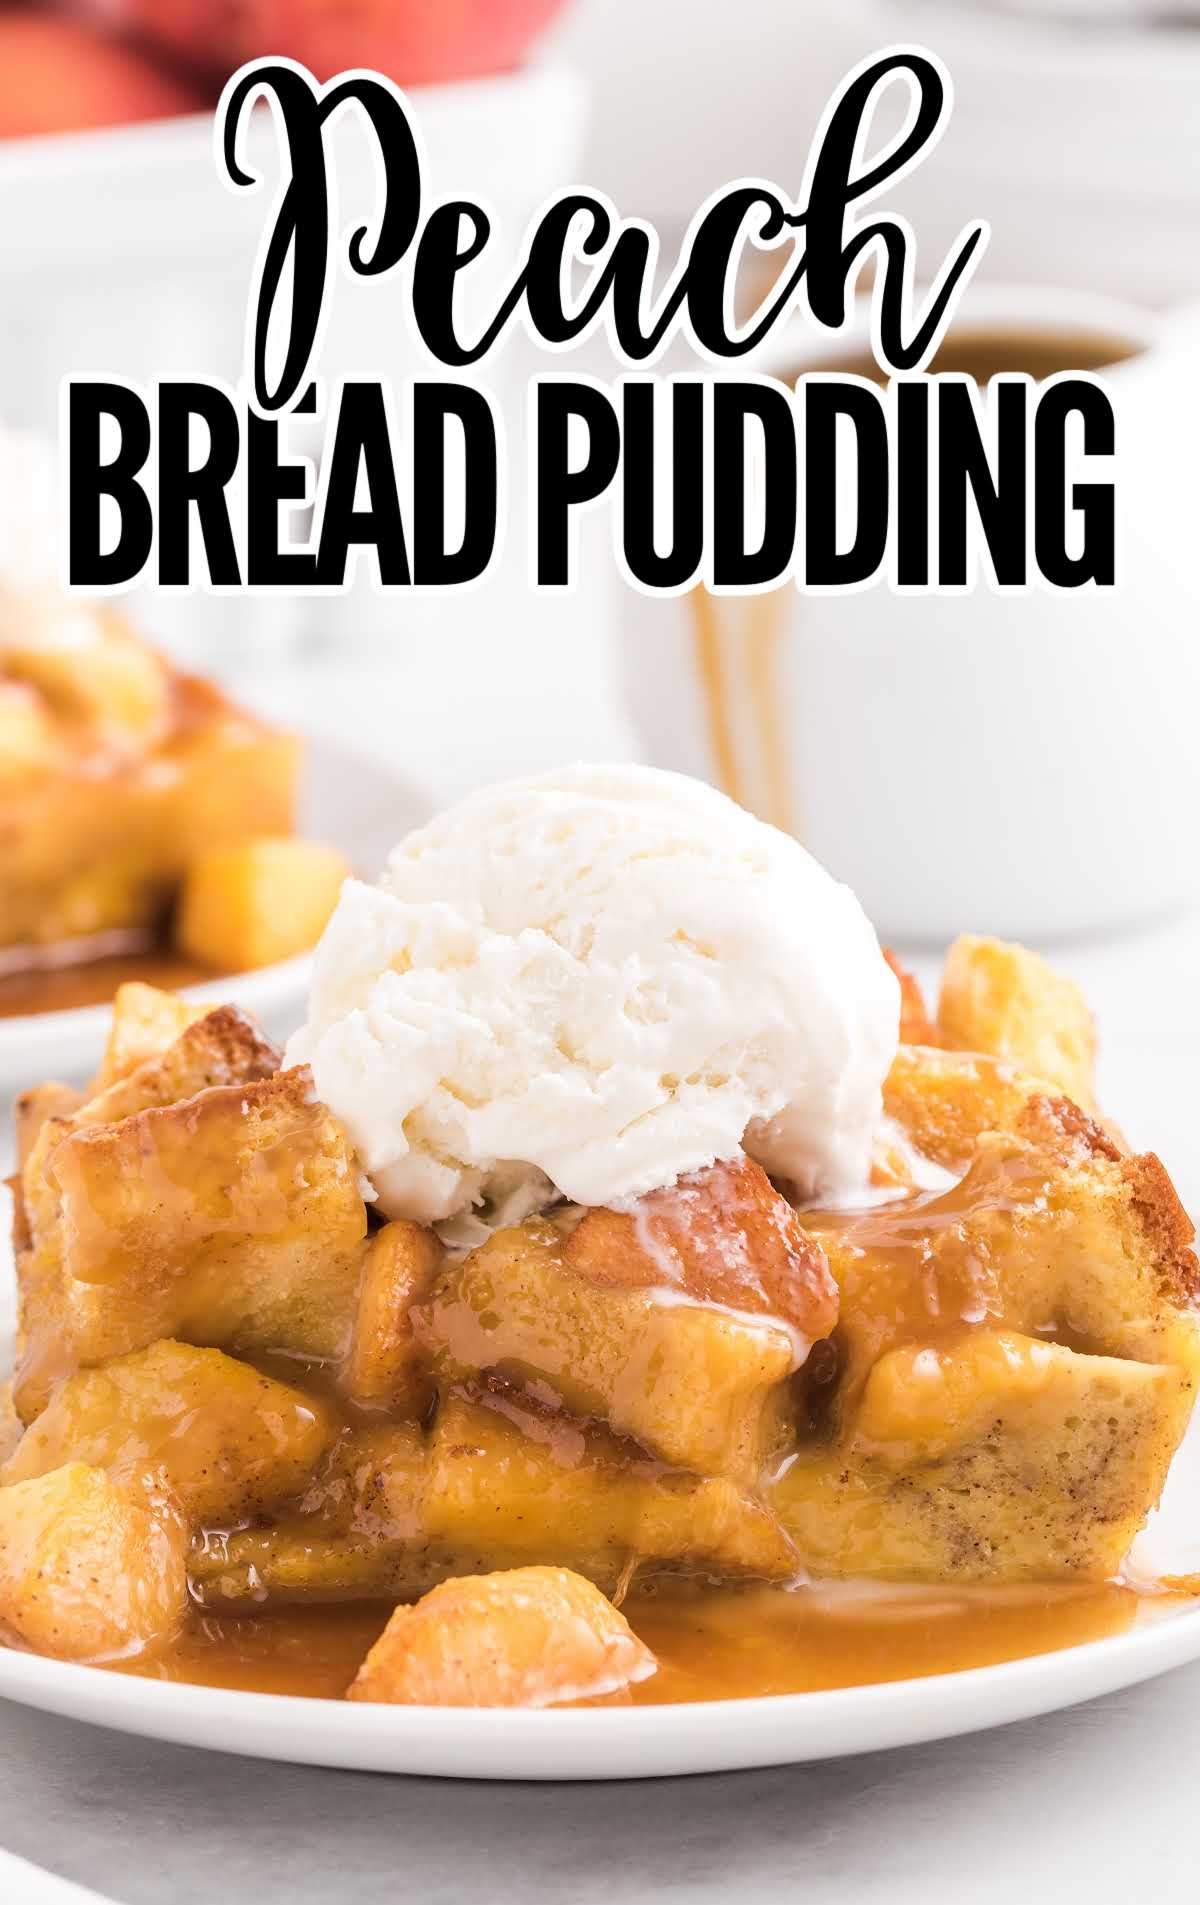 Peach Bread Pudding - The Best Blog Recipes